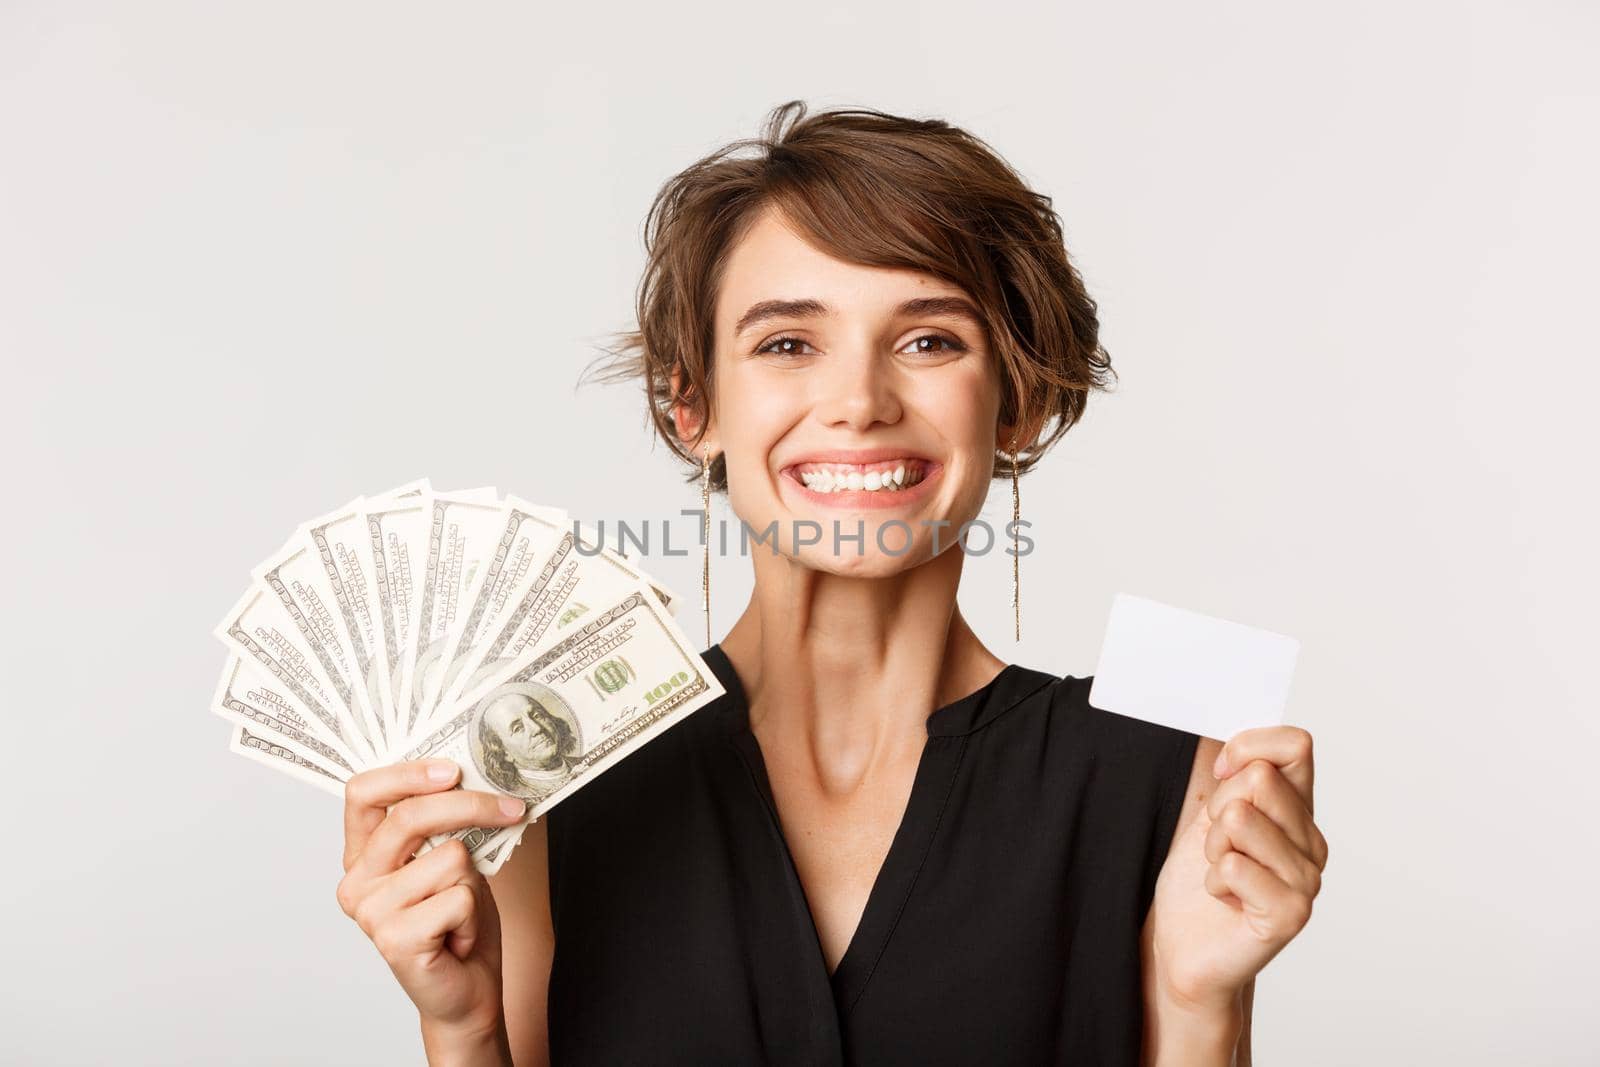 Close-up of successful businesswoman smiling, showing credit card and money, standing over white background.